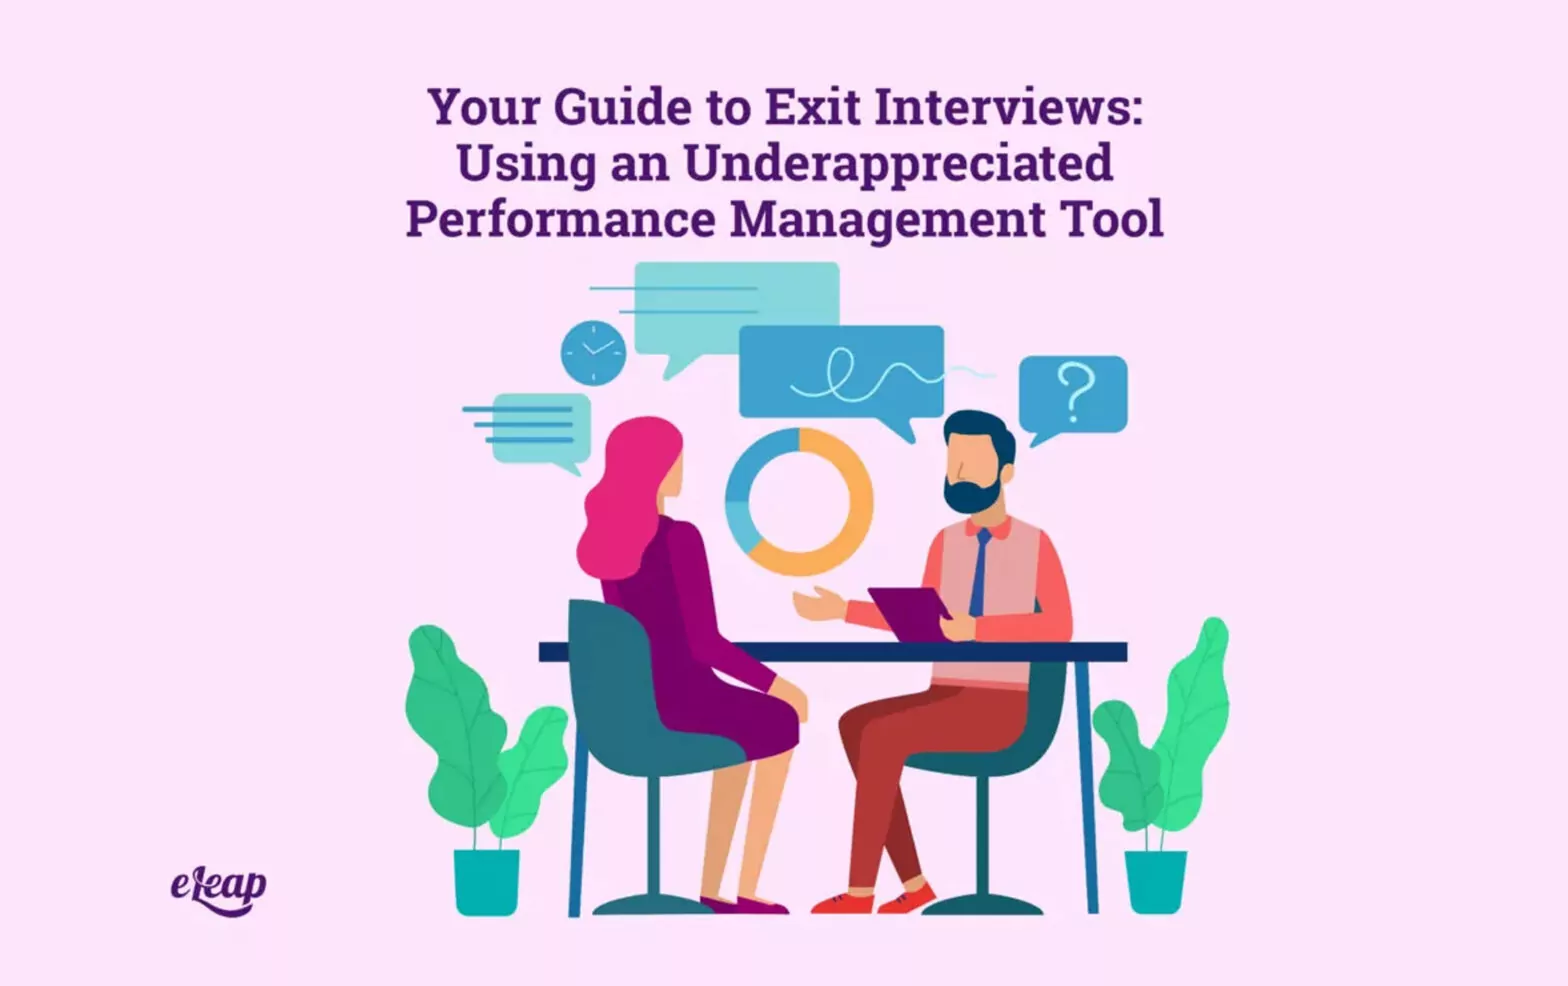 Your Guide to Exit Interviews: Using an Underappreciated Performance Management Tool